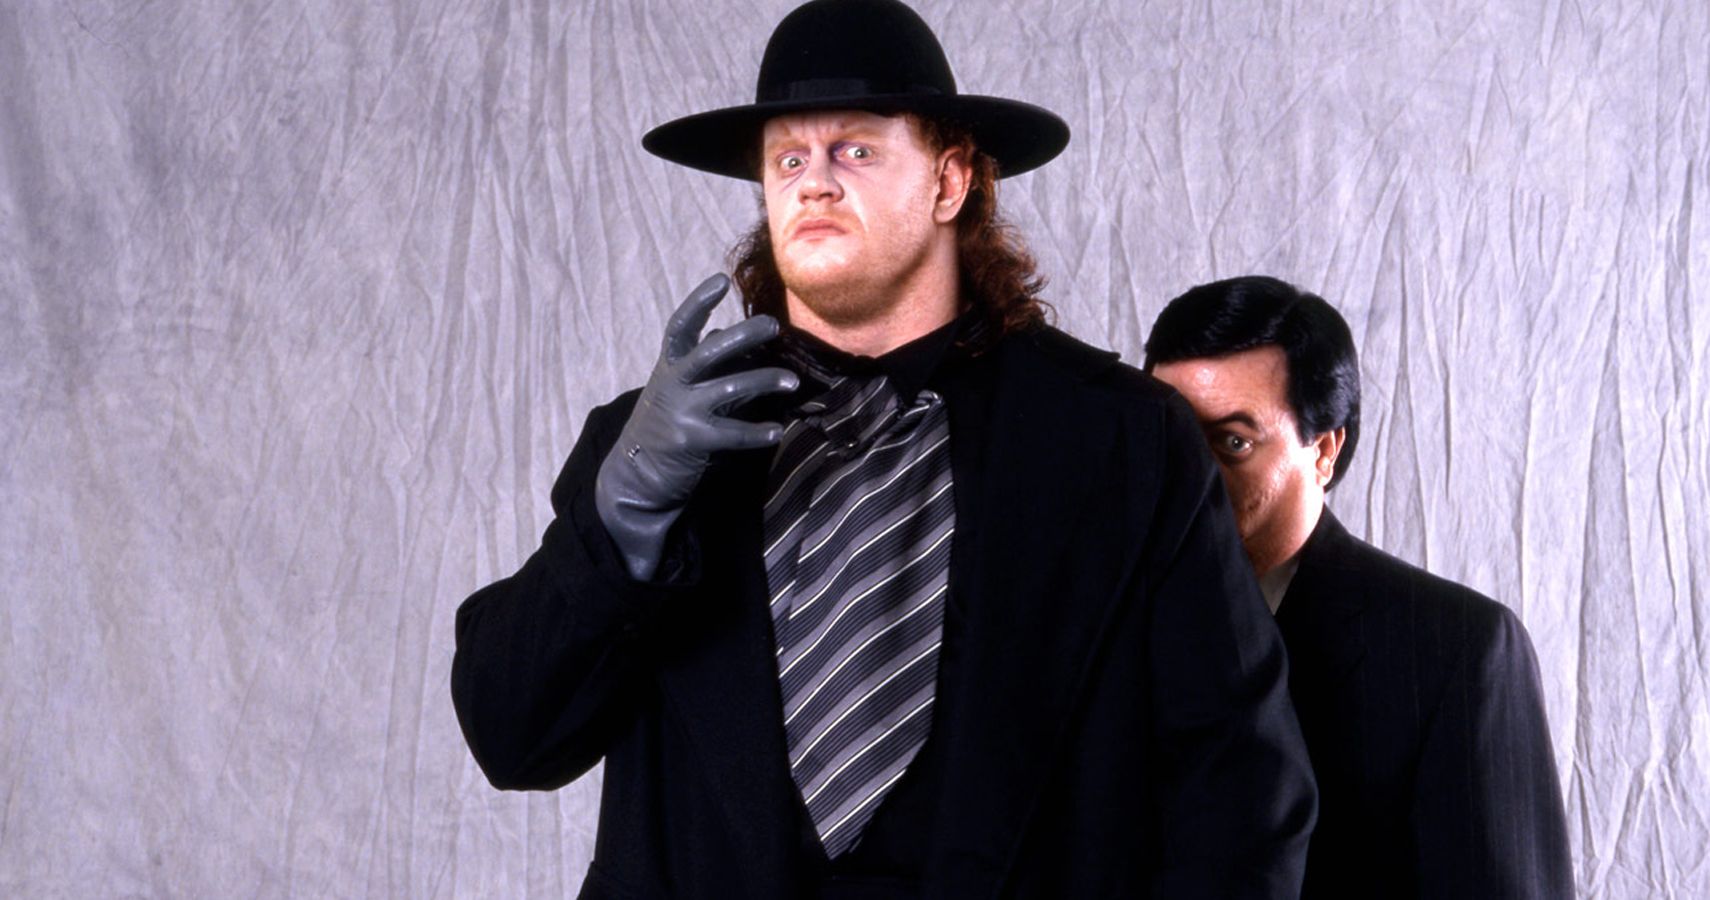 10 vintage photos of the WWE